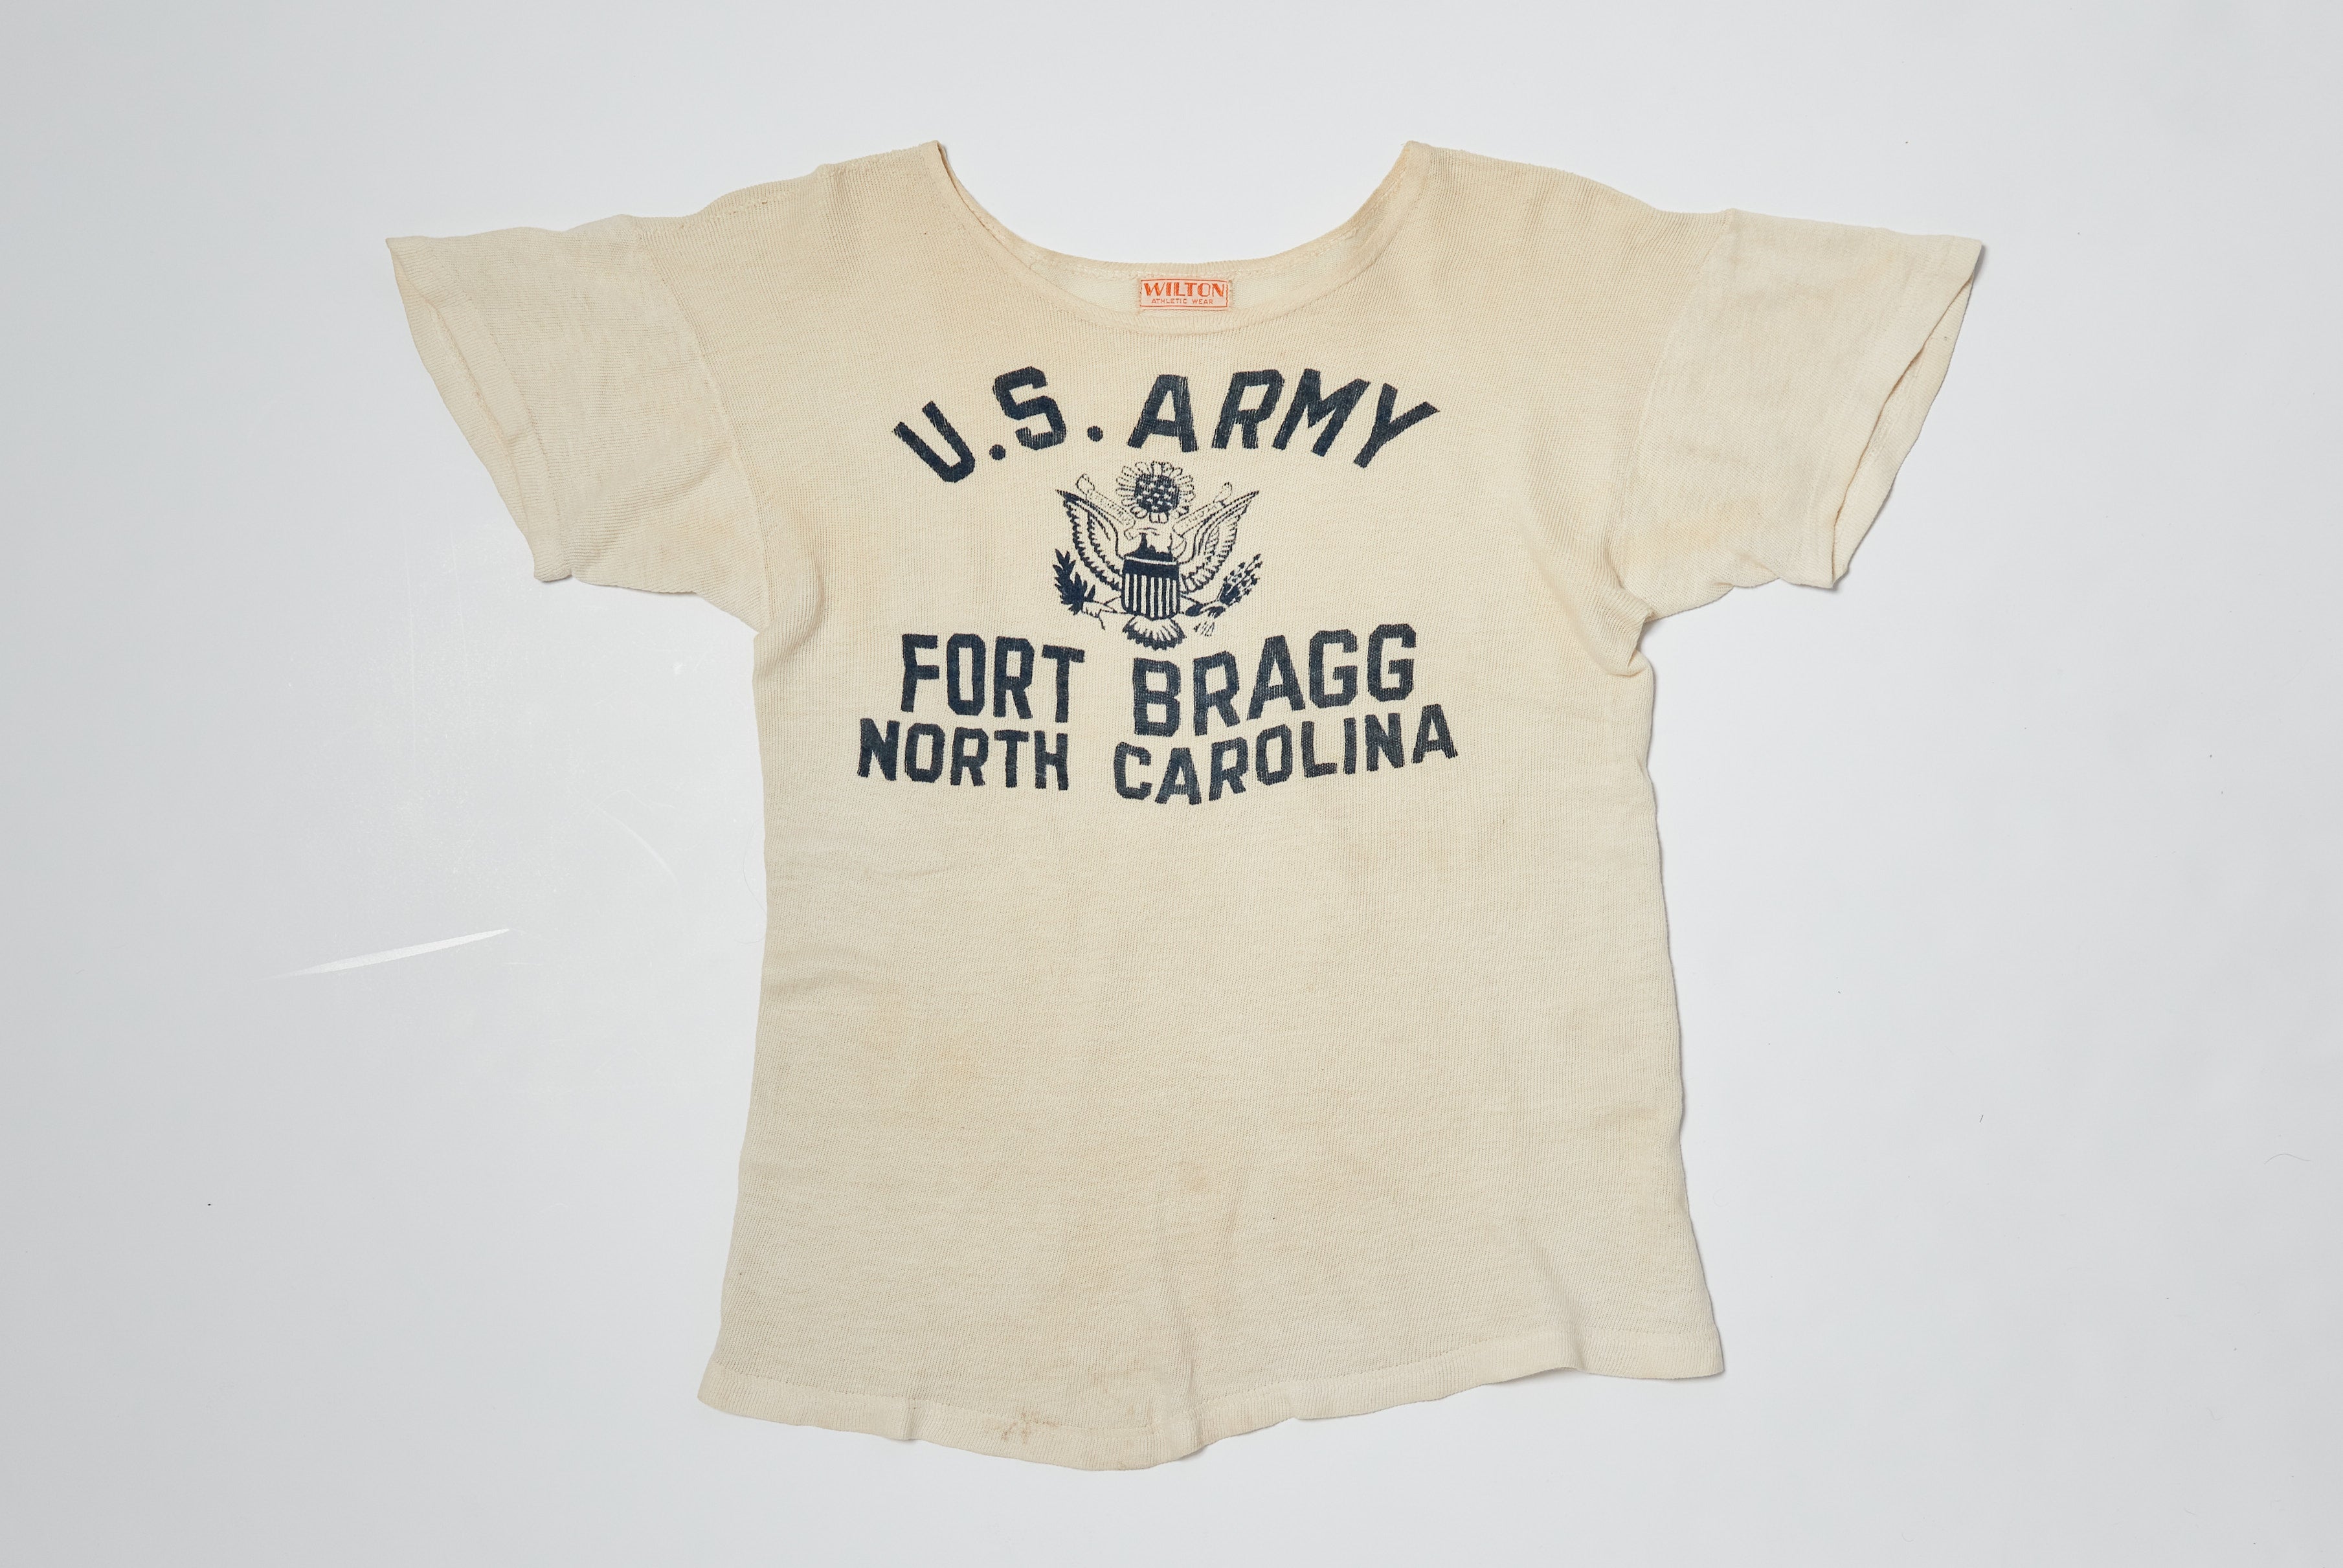 Two NC Vintage Clothing Experts Tell the History of the T-Shirt